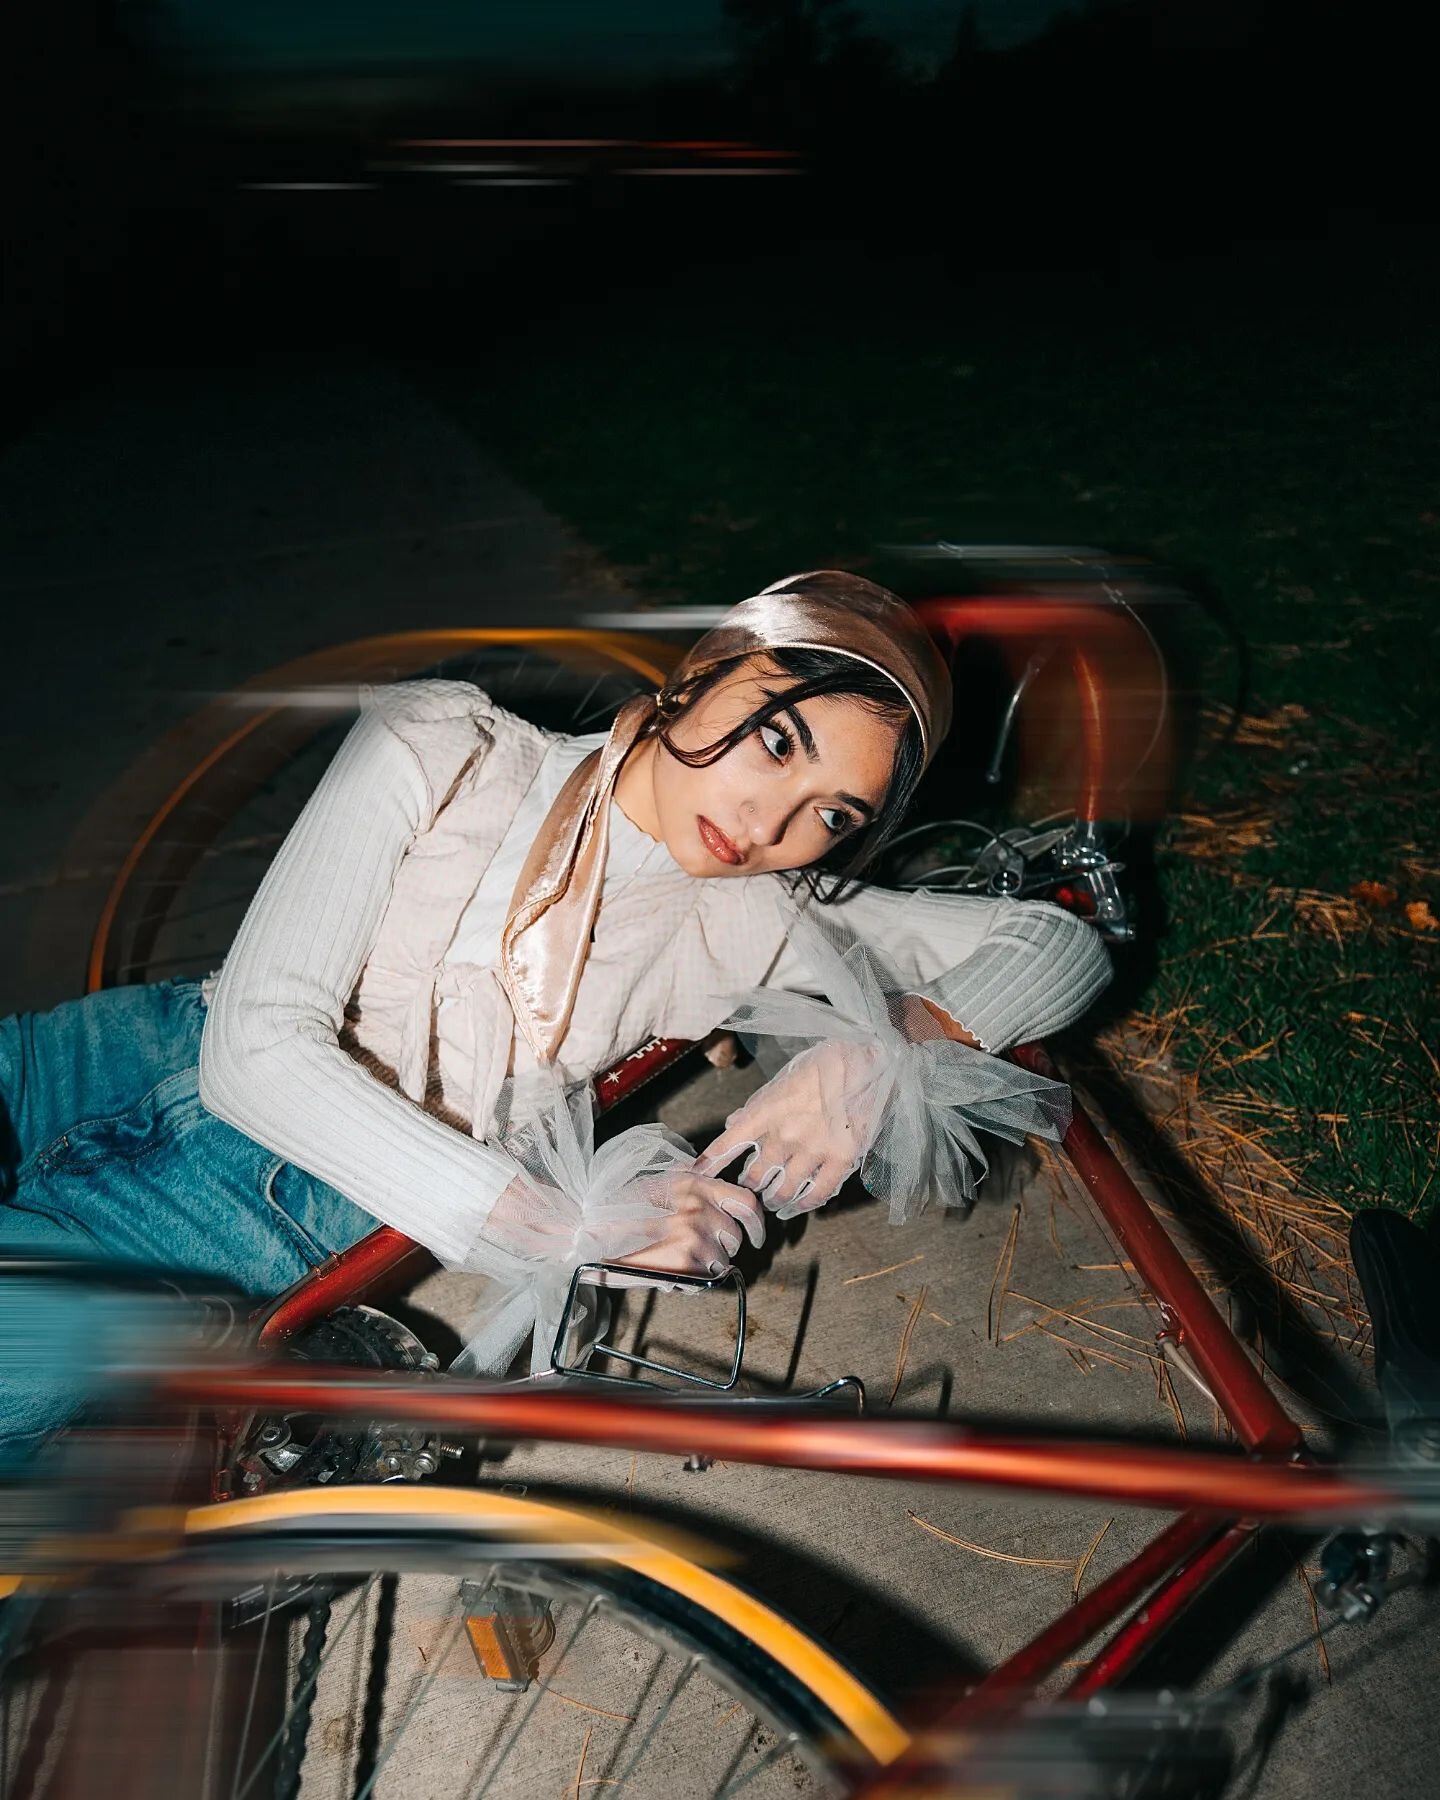 Feelin Dazed💫🌃

Absolutely loved creating this set with Dua. As I was editing I felt compelled to add this blurred effect on some of the shots! Anyone interested to see how I did it? Might make a lil vid about it, lemme know🙌

&bull;
Model: @itsdu